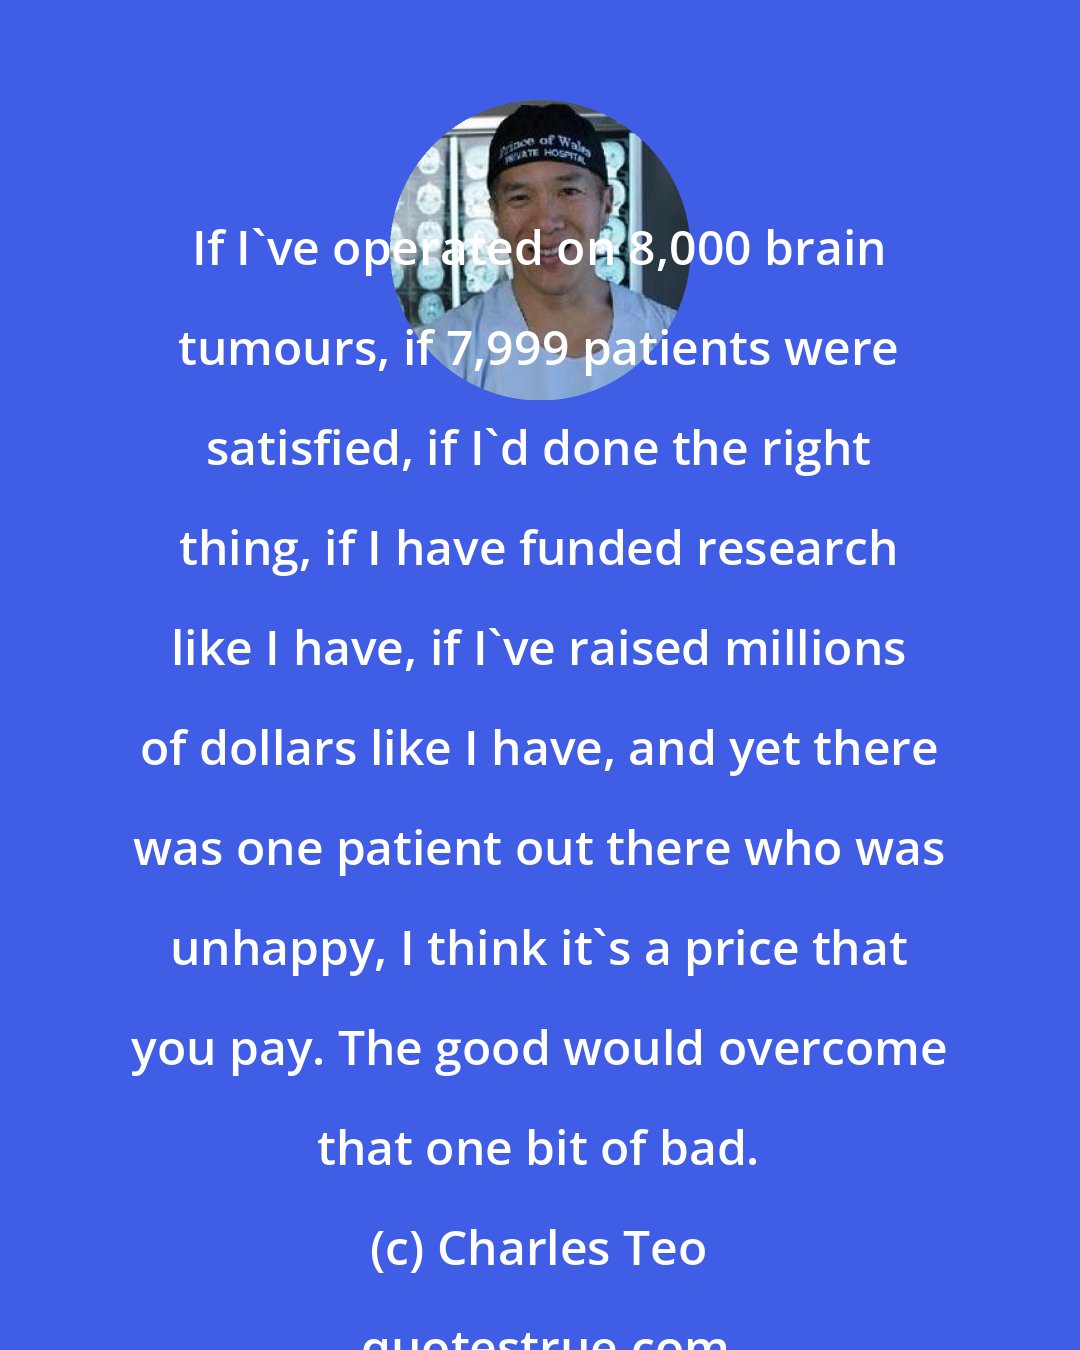 Charles Teo: If I've operated on 8,000 brain tumours, if 7,999 patients were satisfied, if I'd done the right thing, if I have funded research like I have, if I've raised millions of dollars like I have, and yet there was one patient out there who was unhappy, I think it's a price that you pay. The good would overcome that one bit of bad.